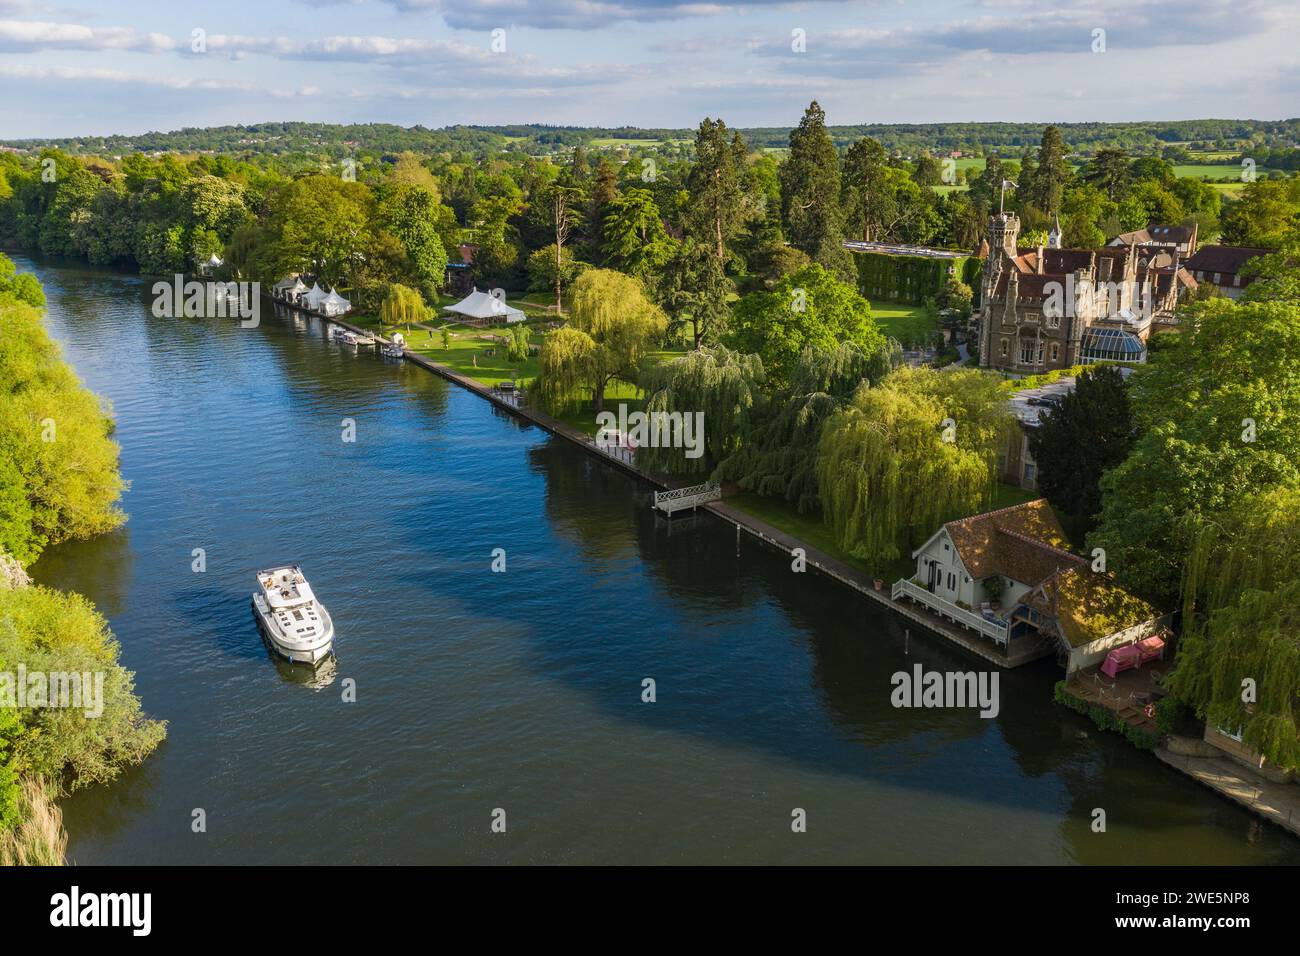 Aerial view of a Le Boat Horizon 4 houseboat passing the Oakley Court Hotel along the River Thames, Water Oakley, near Windsor, Berkshire, England, Un Stock Photo